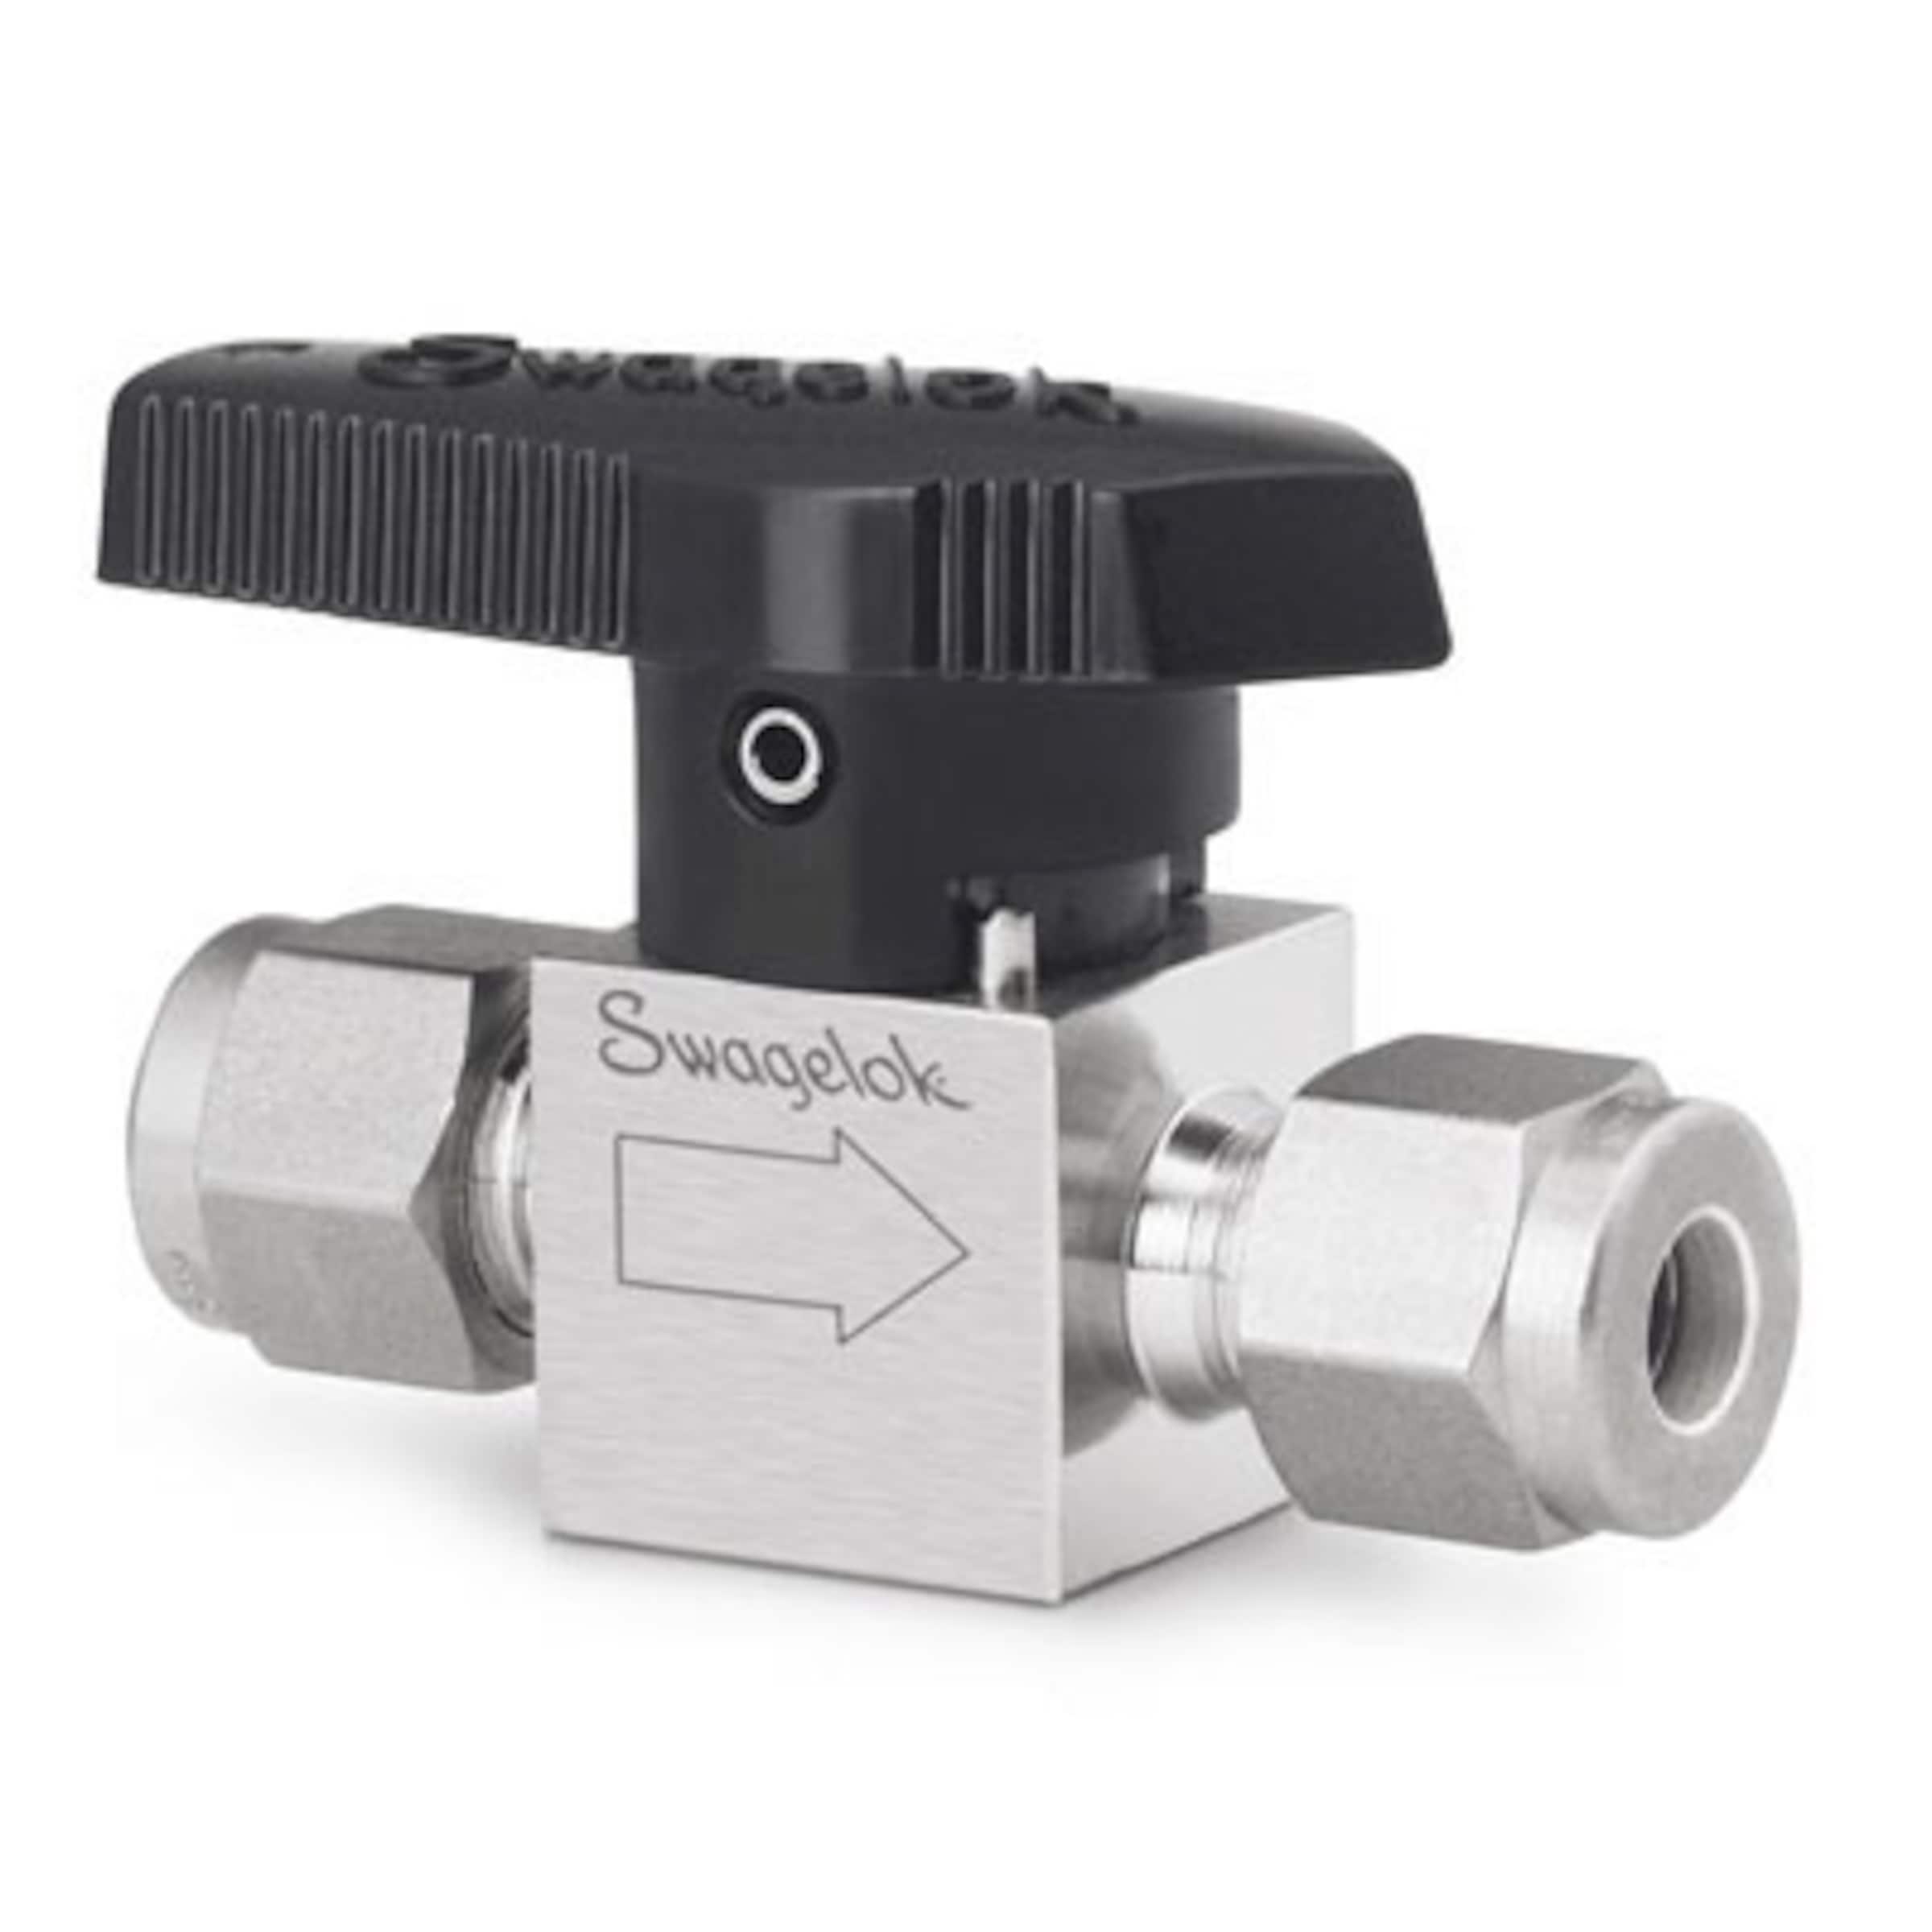 Stainless Steel Quarter Turn Instrument Plug Valve, 3/8 in. Swagelok Tube  Fitting, 1.1 Cv, Black Handle, Plug Valves, Ball and Quarter-Turn Plug  Valves, Valves, All Products